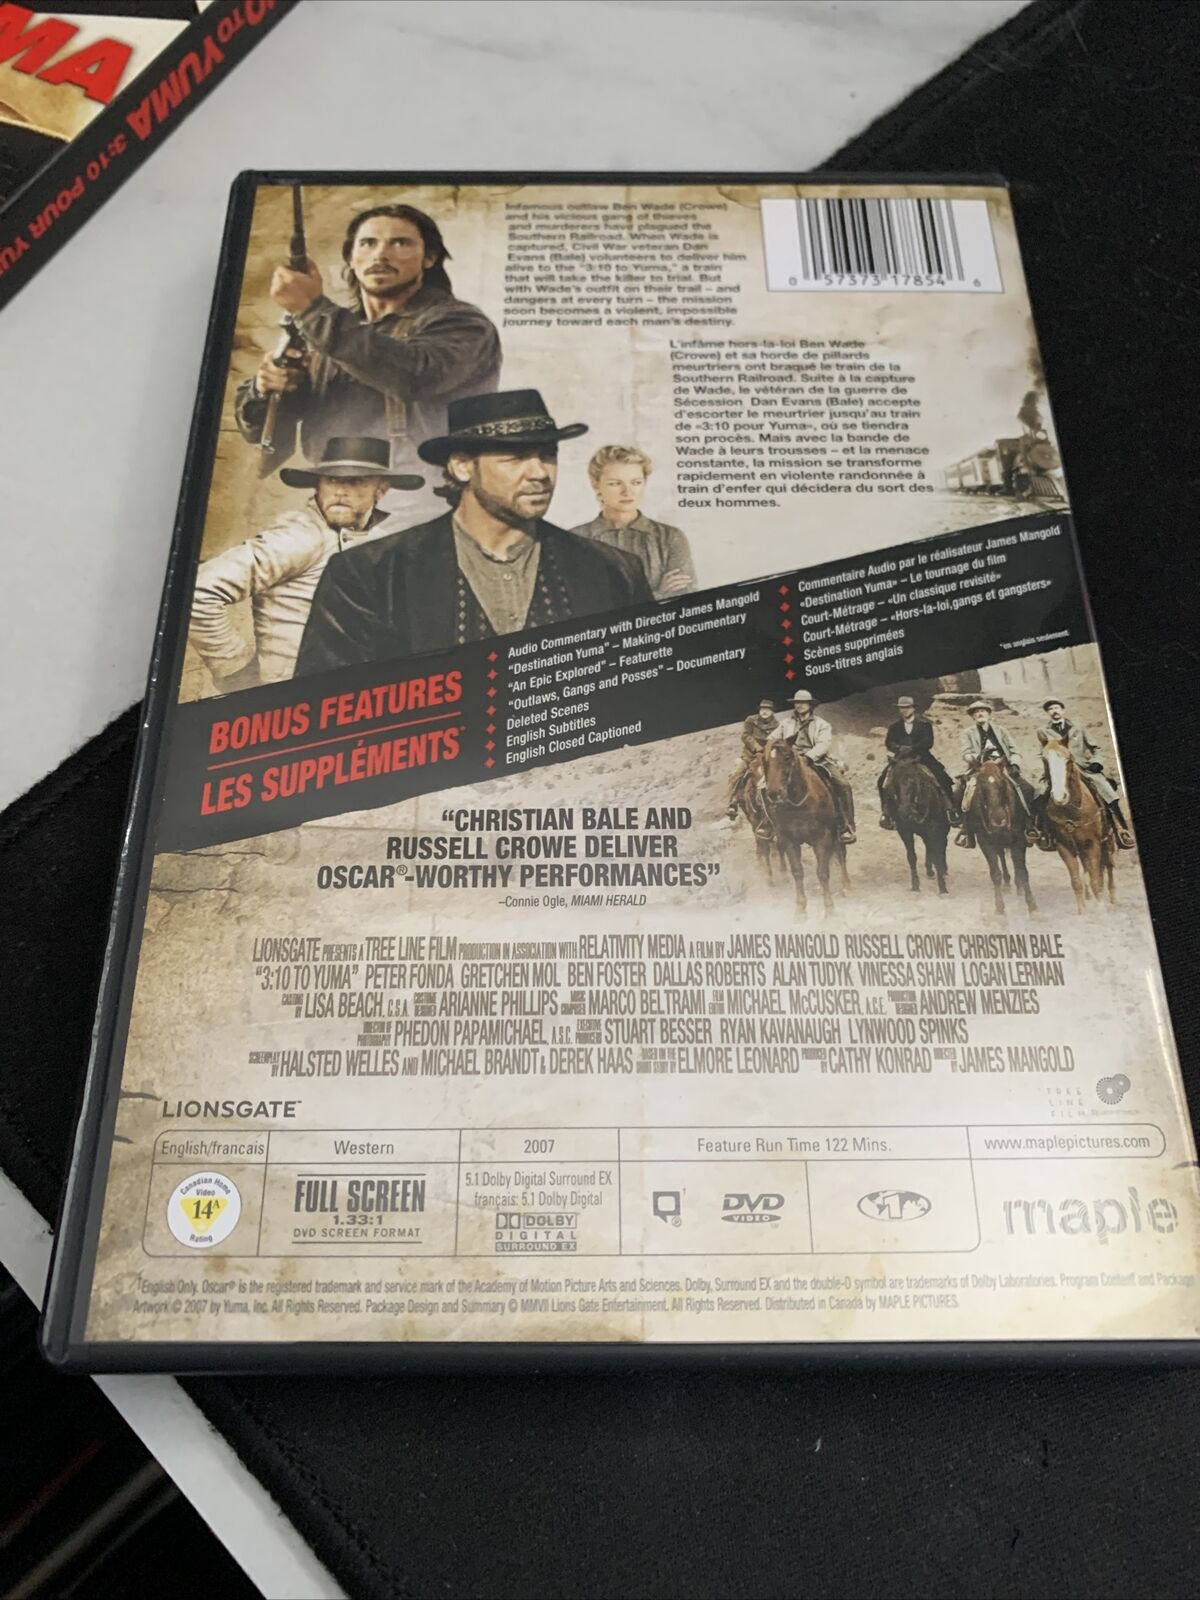 3:10 to Yuma (DVD, 2008, Canadian; French Version; Pan and Scan)